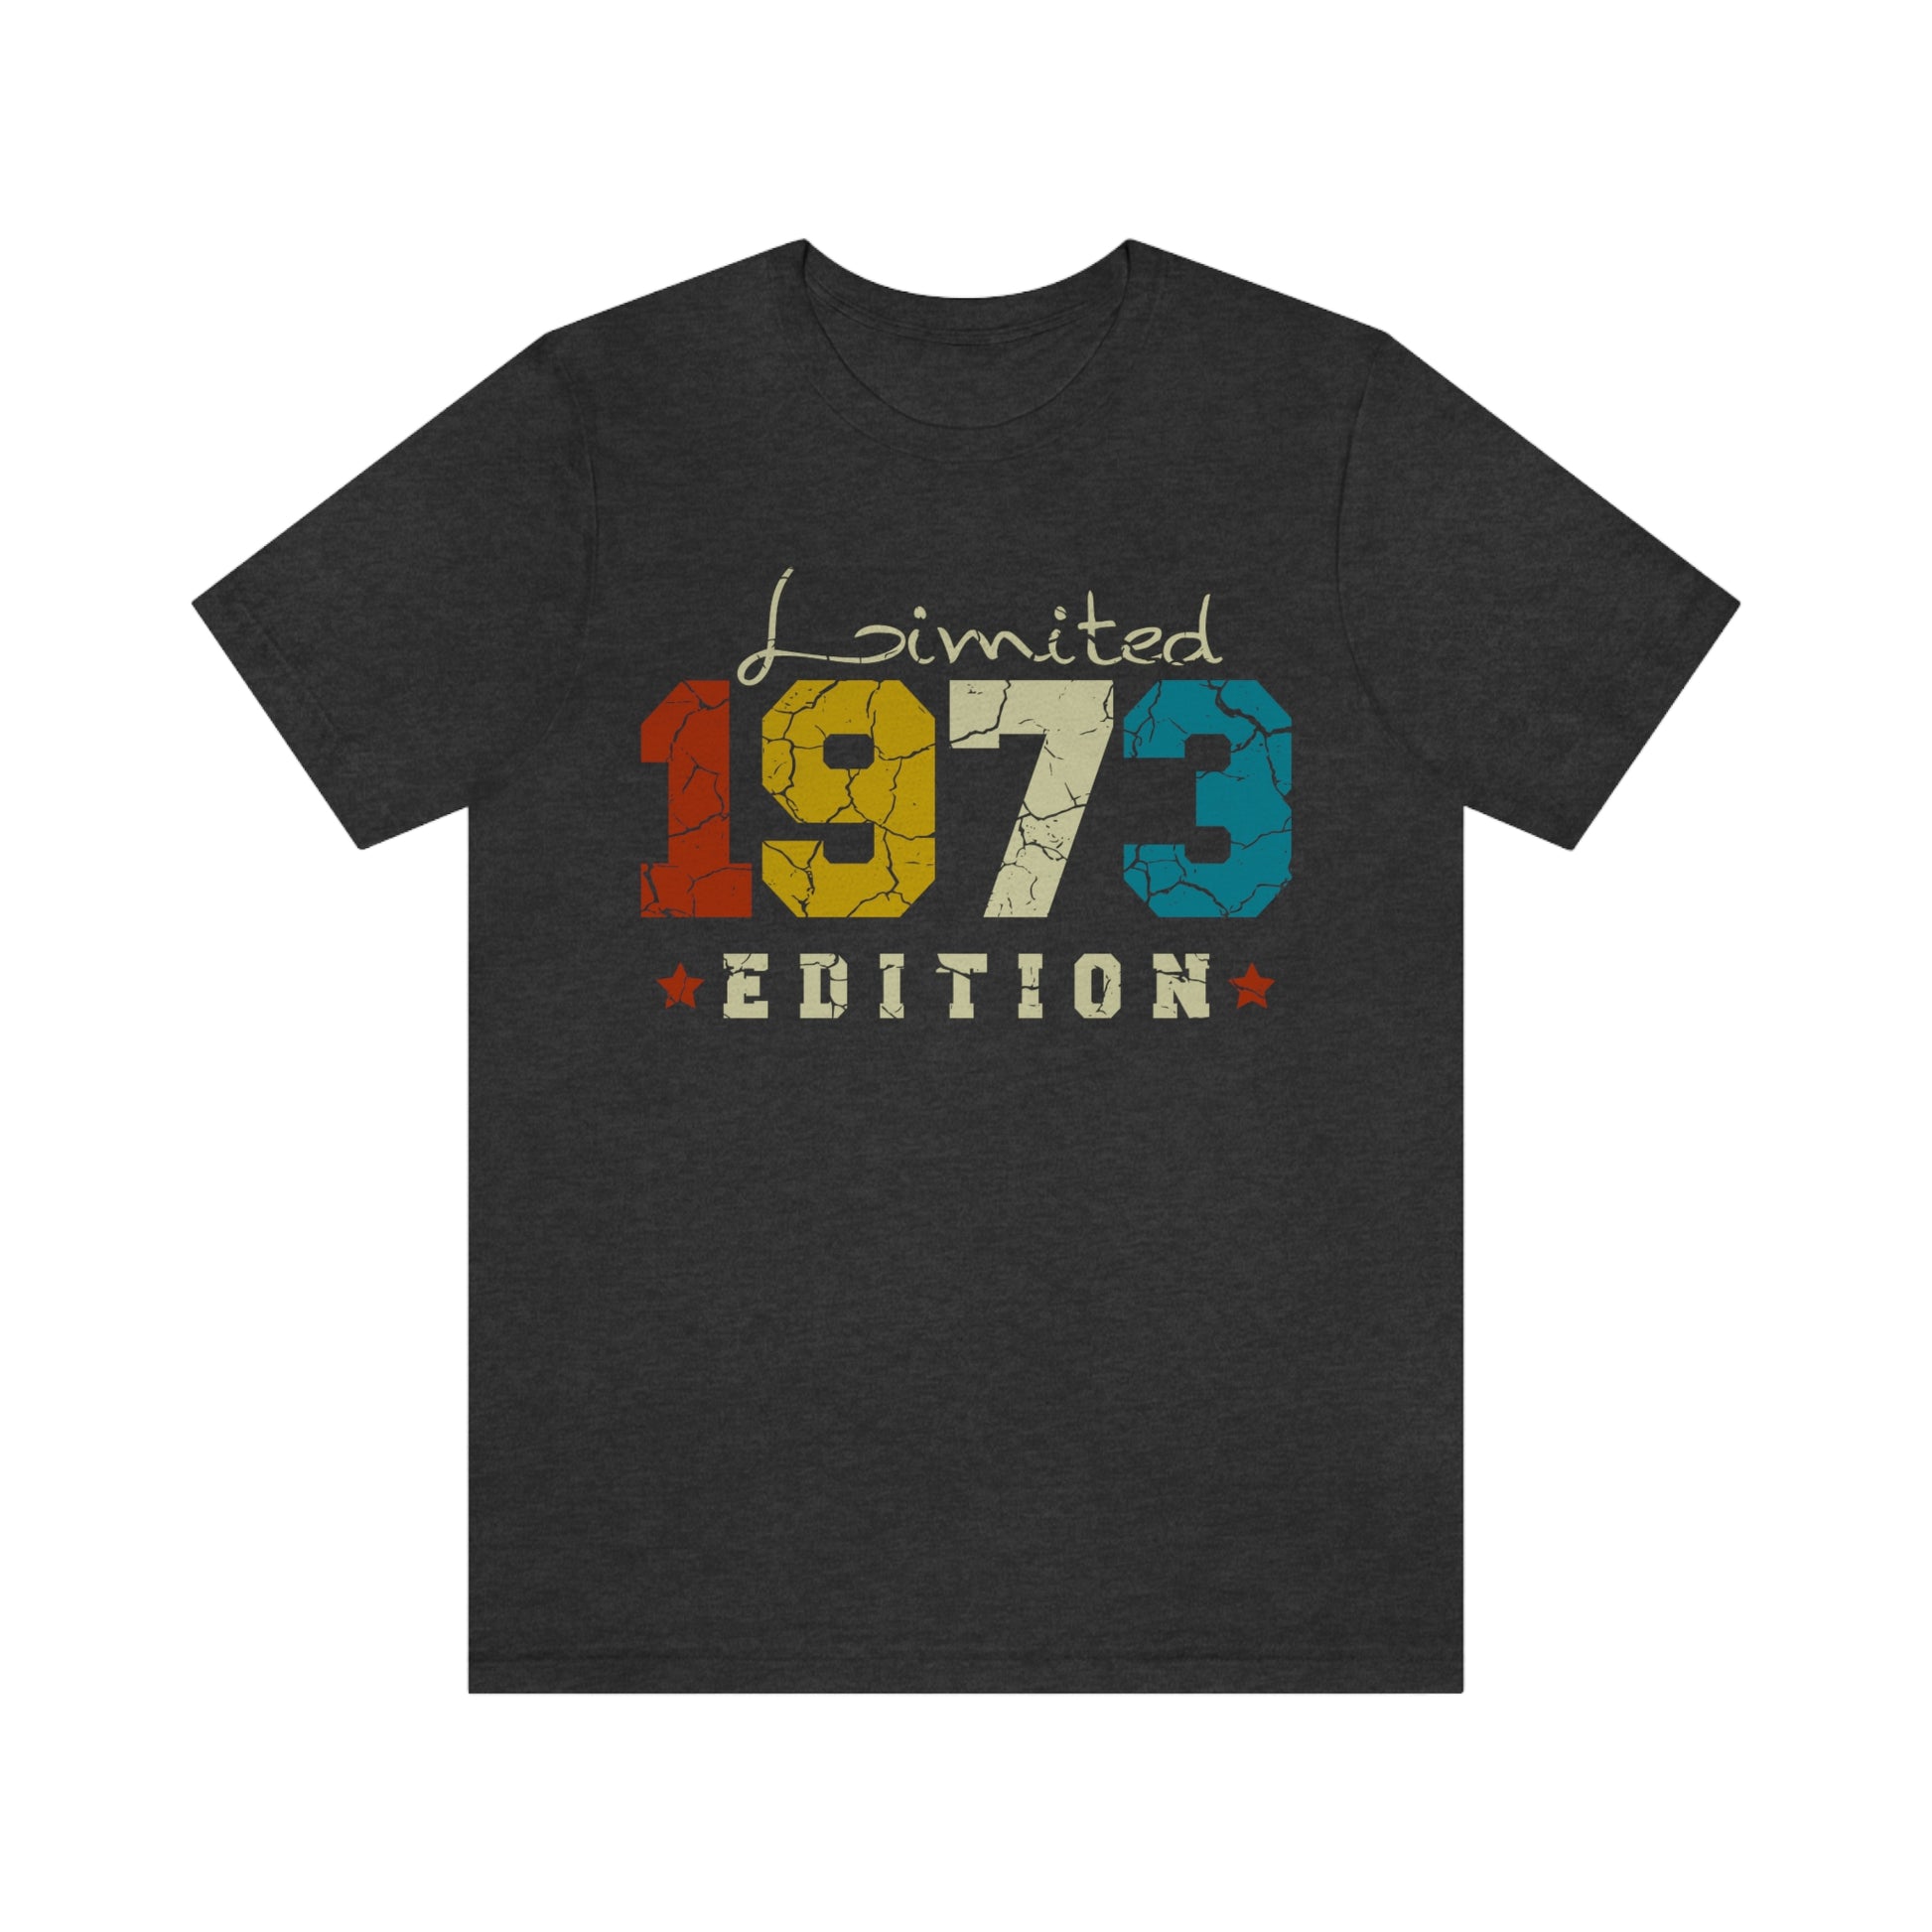 50th birthday gifts for women or men,  Limited 1973 Edition Shirt for wife or husband - 37 Design Unit